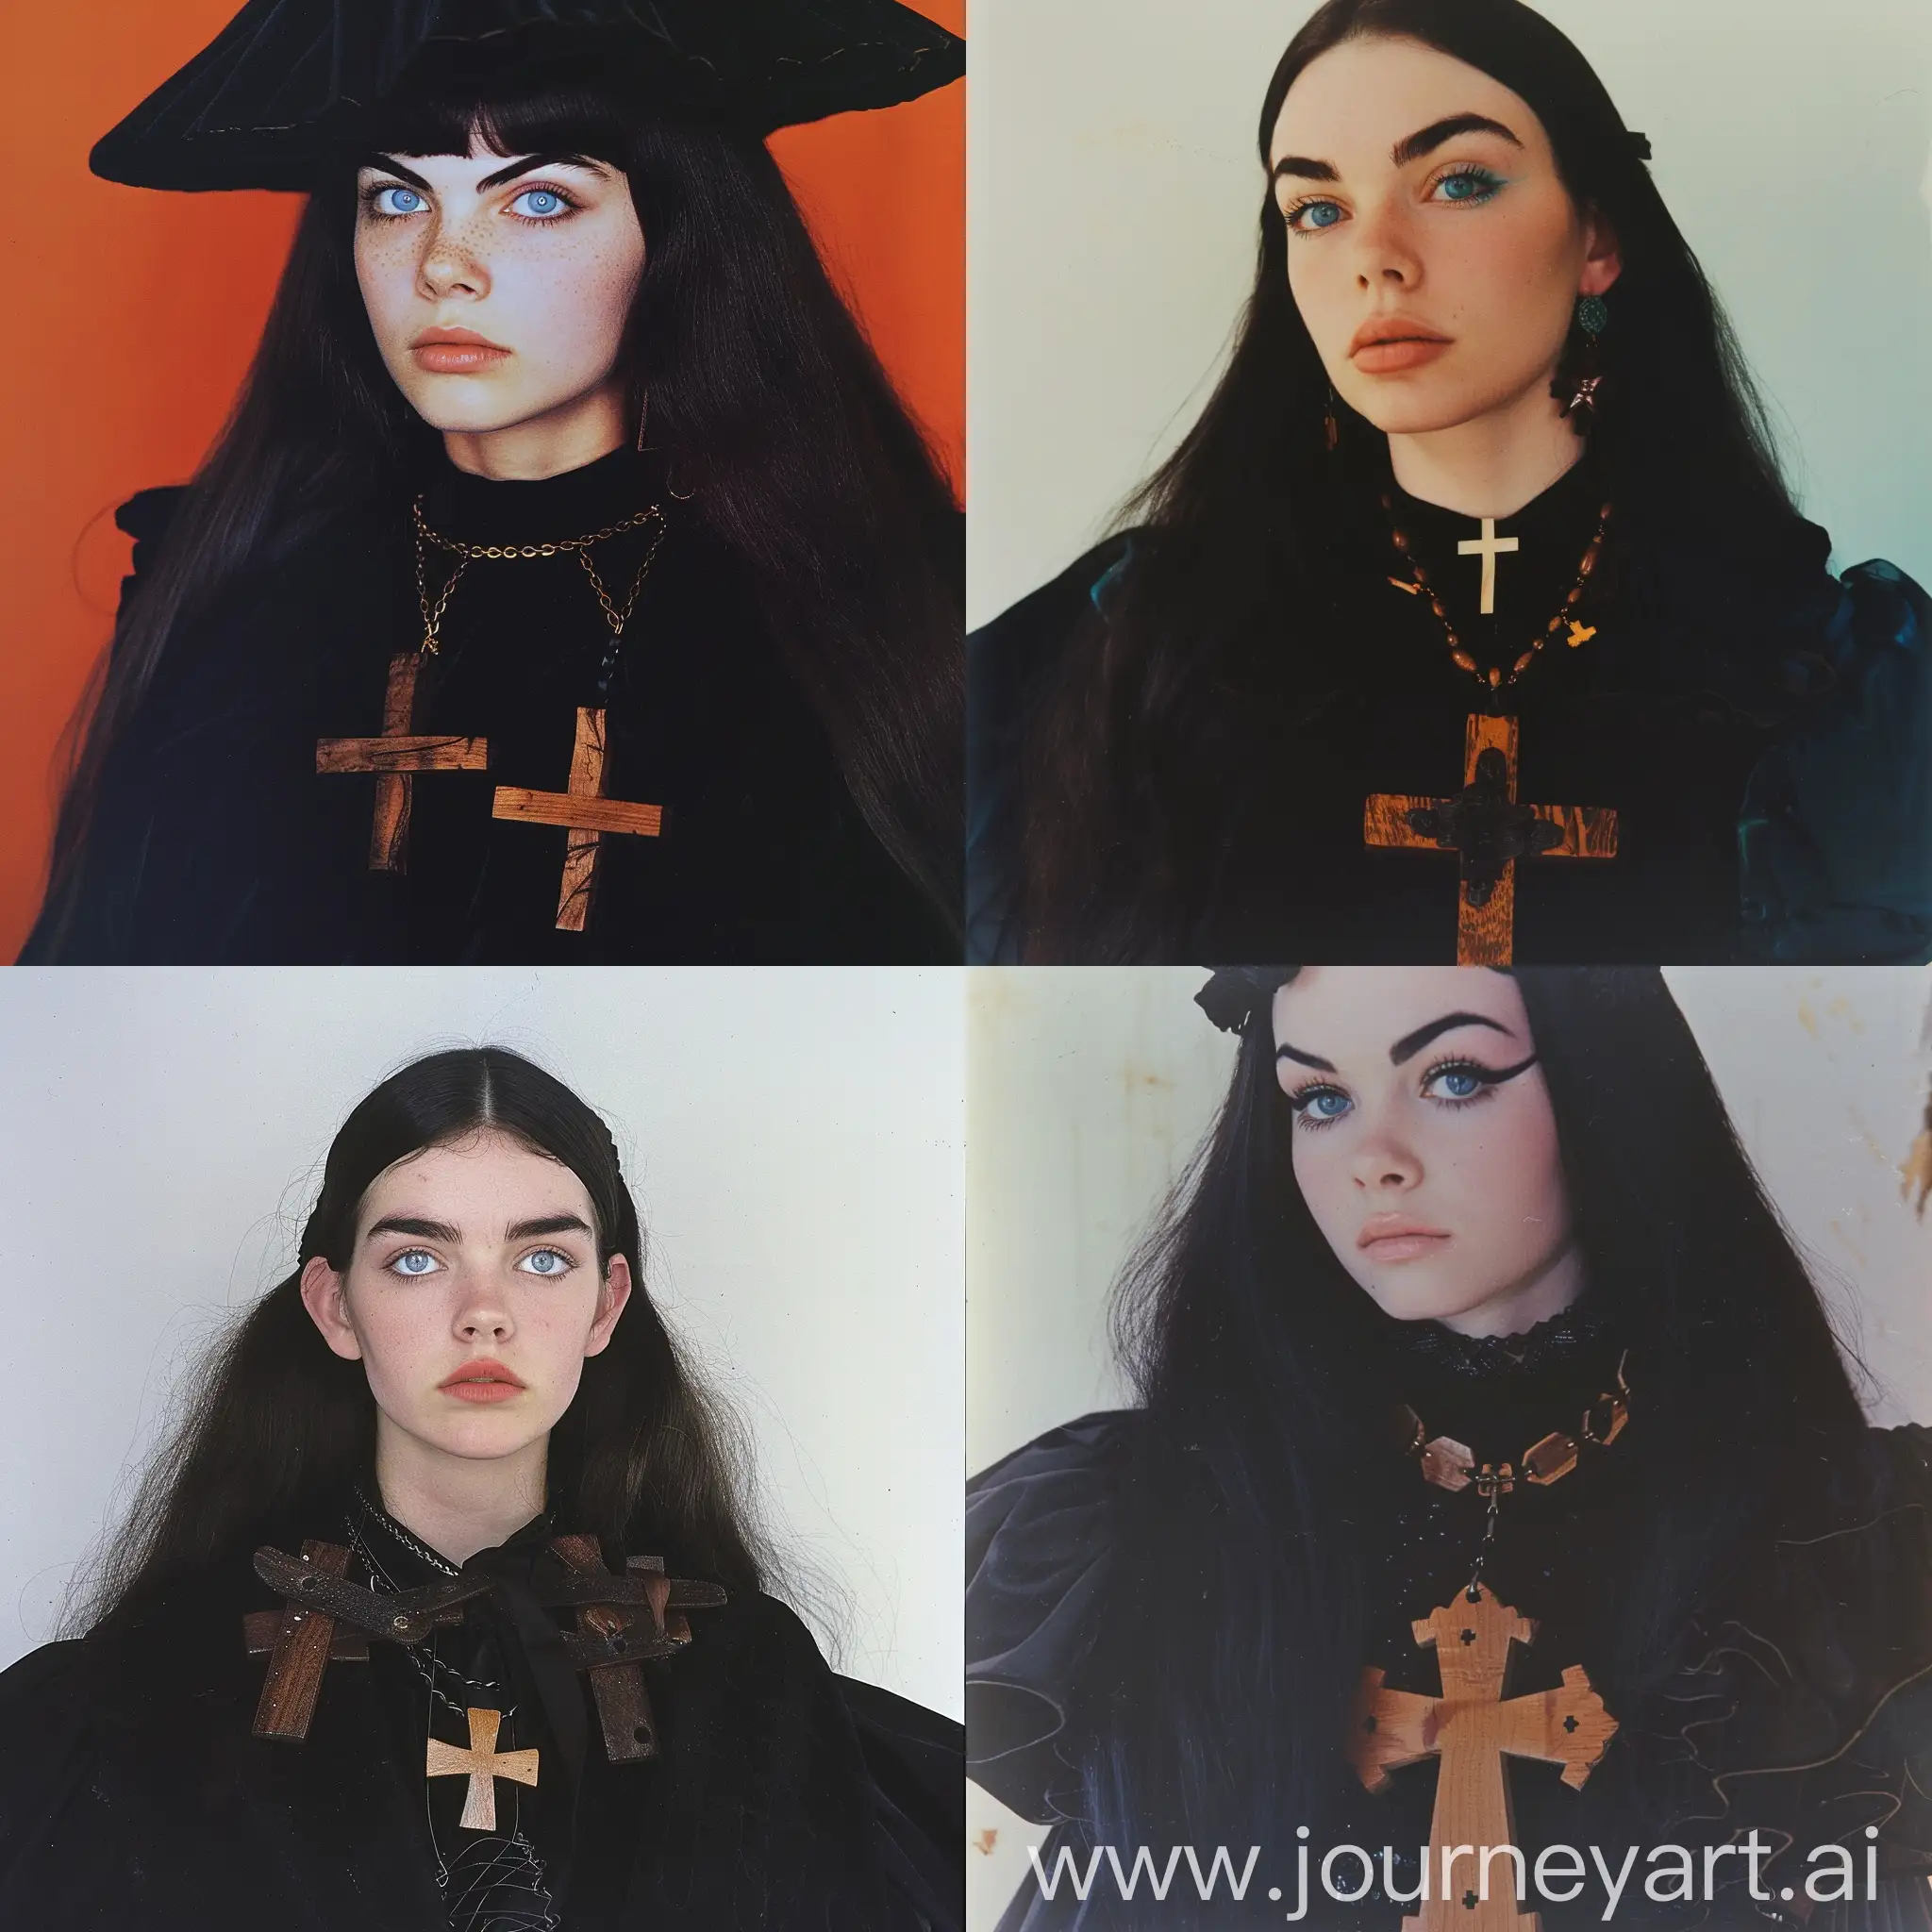 Elegant-1970s-Woman-in-Black-Dress-with-Wooden-Cross-Necklace